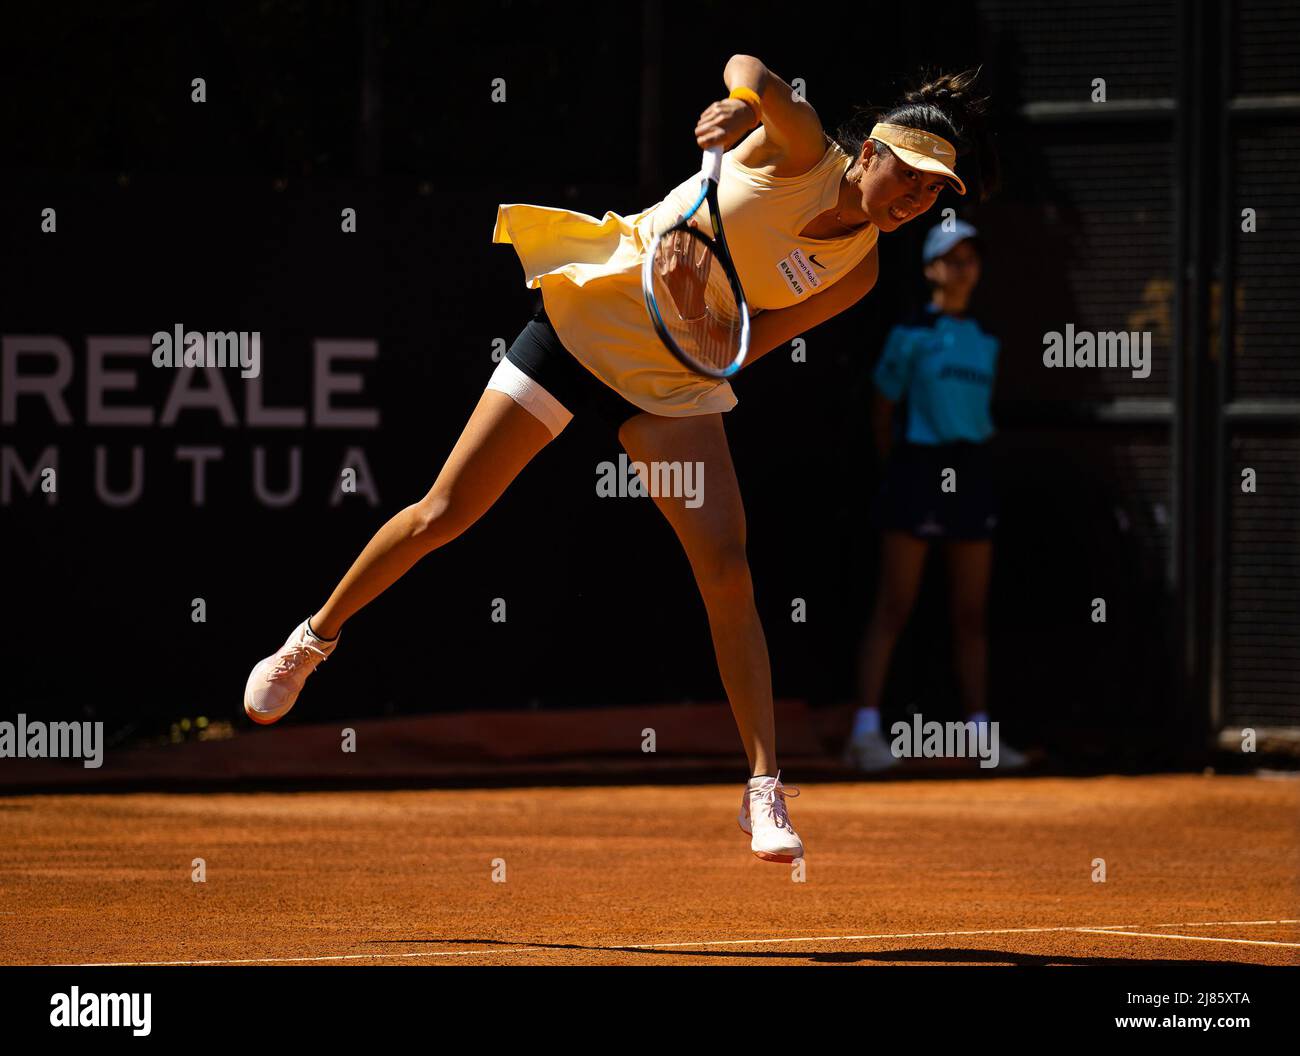 Rome, Italy - 12/05/2022, Hao-Ching Chan of Chinese Taipeh playing doubles at the Internazionali BNL d'Italia 2022, Masters 1000 tennis tournament on May 12, 2022 at Foro Italico in Rome, Italy - Photo: Rob Prange/DPPI/LiveMedia Stock Photo